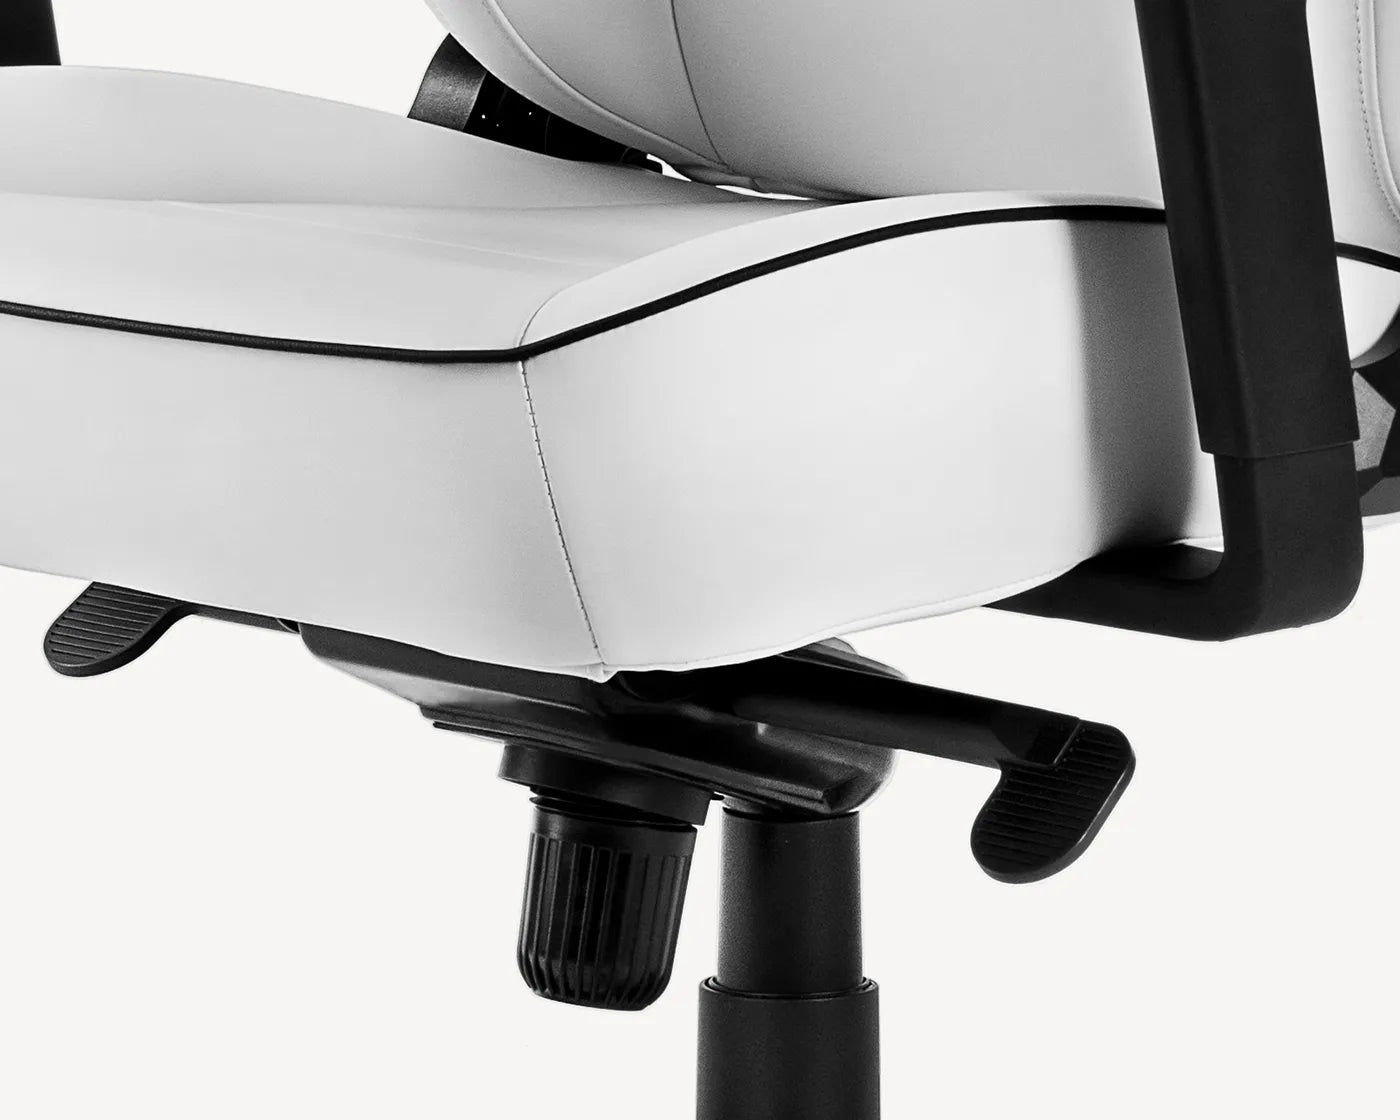 Close-up of white ergonomic chair's base showing max weight capacity and gas lift mechanism.